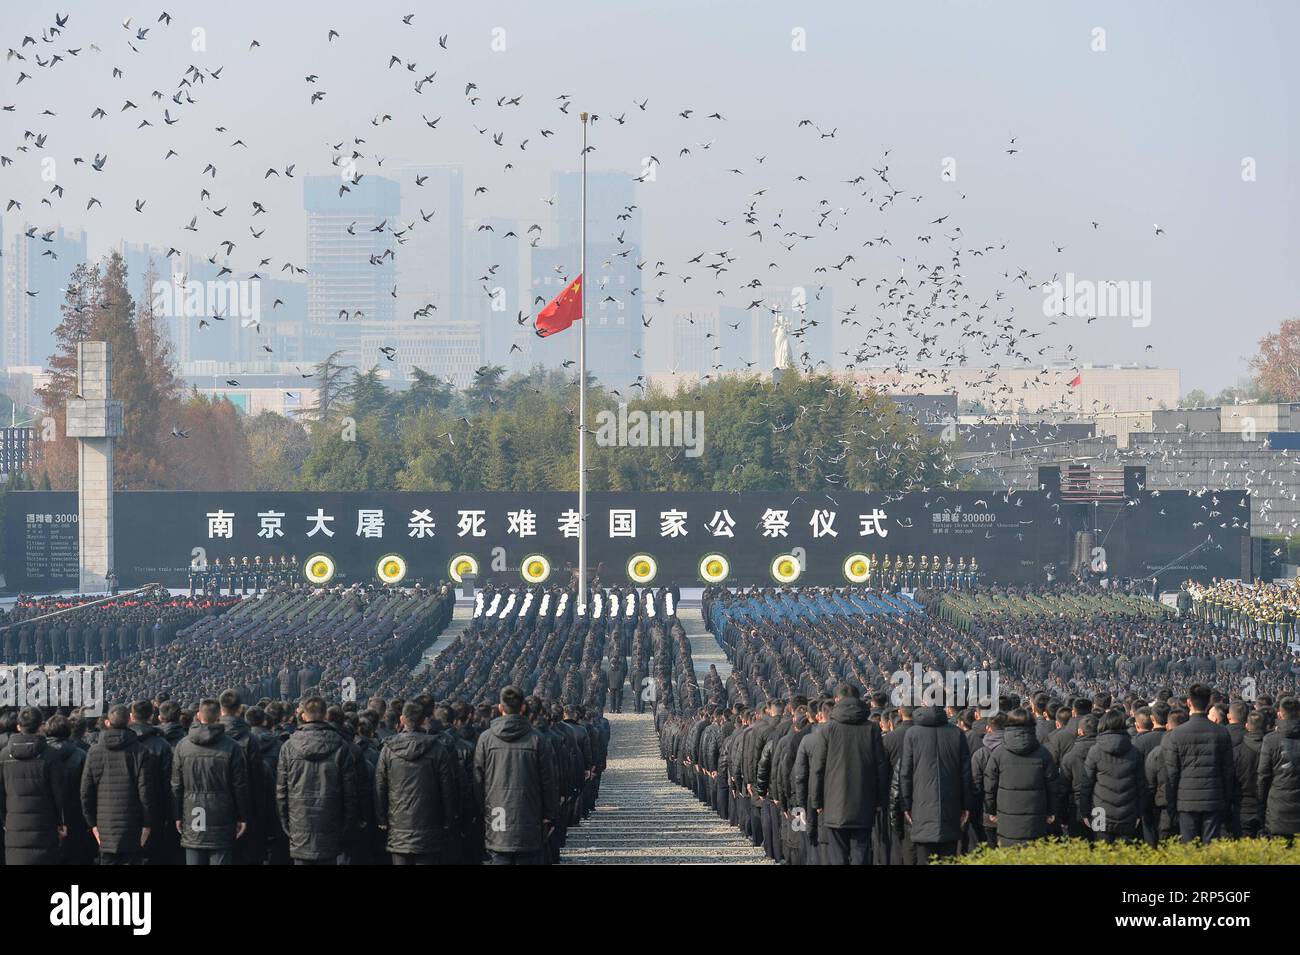 (181213) -- BEIJING, Dec. 13, 2018 -- Photo taken on Dec. 13, 2018 shows pigeons flying during the state memorial ceremony for China s National Memorial Day for Nanjing Massacre Victims at the memorial hall for the massacre victims in Nanjing, east China s Jiangsu Province. ) Xinhua Headlines: China observes national memorial day with praying for peace JixChunpeng PUBLICATIONxNOTxINxCHN Stock Photo